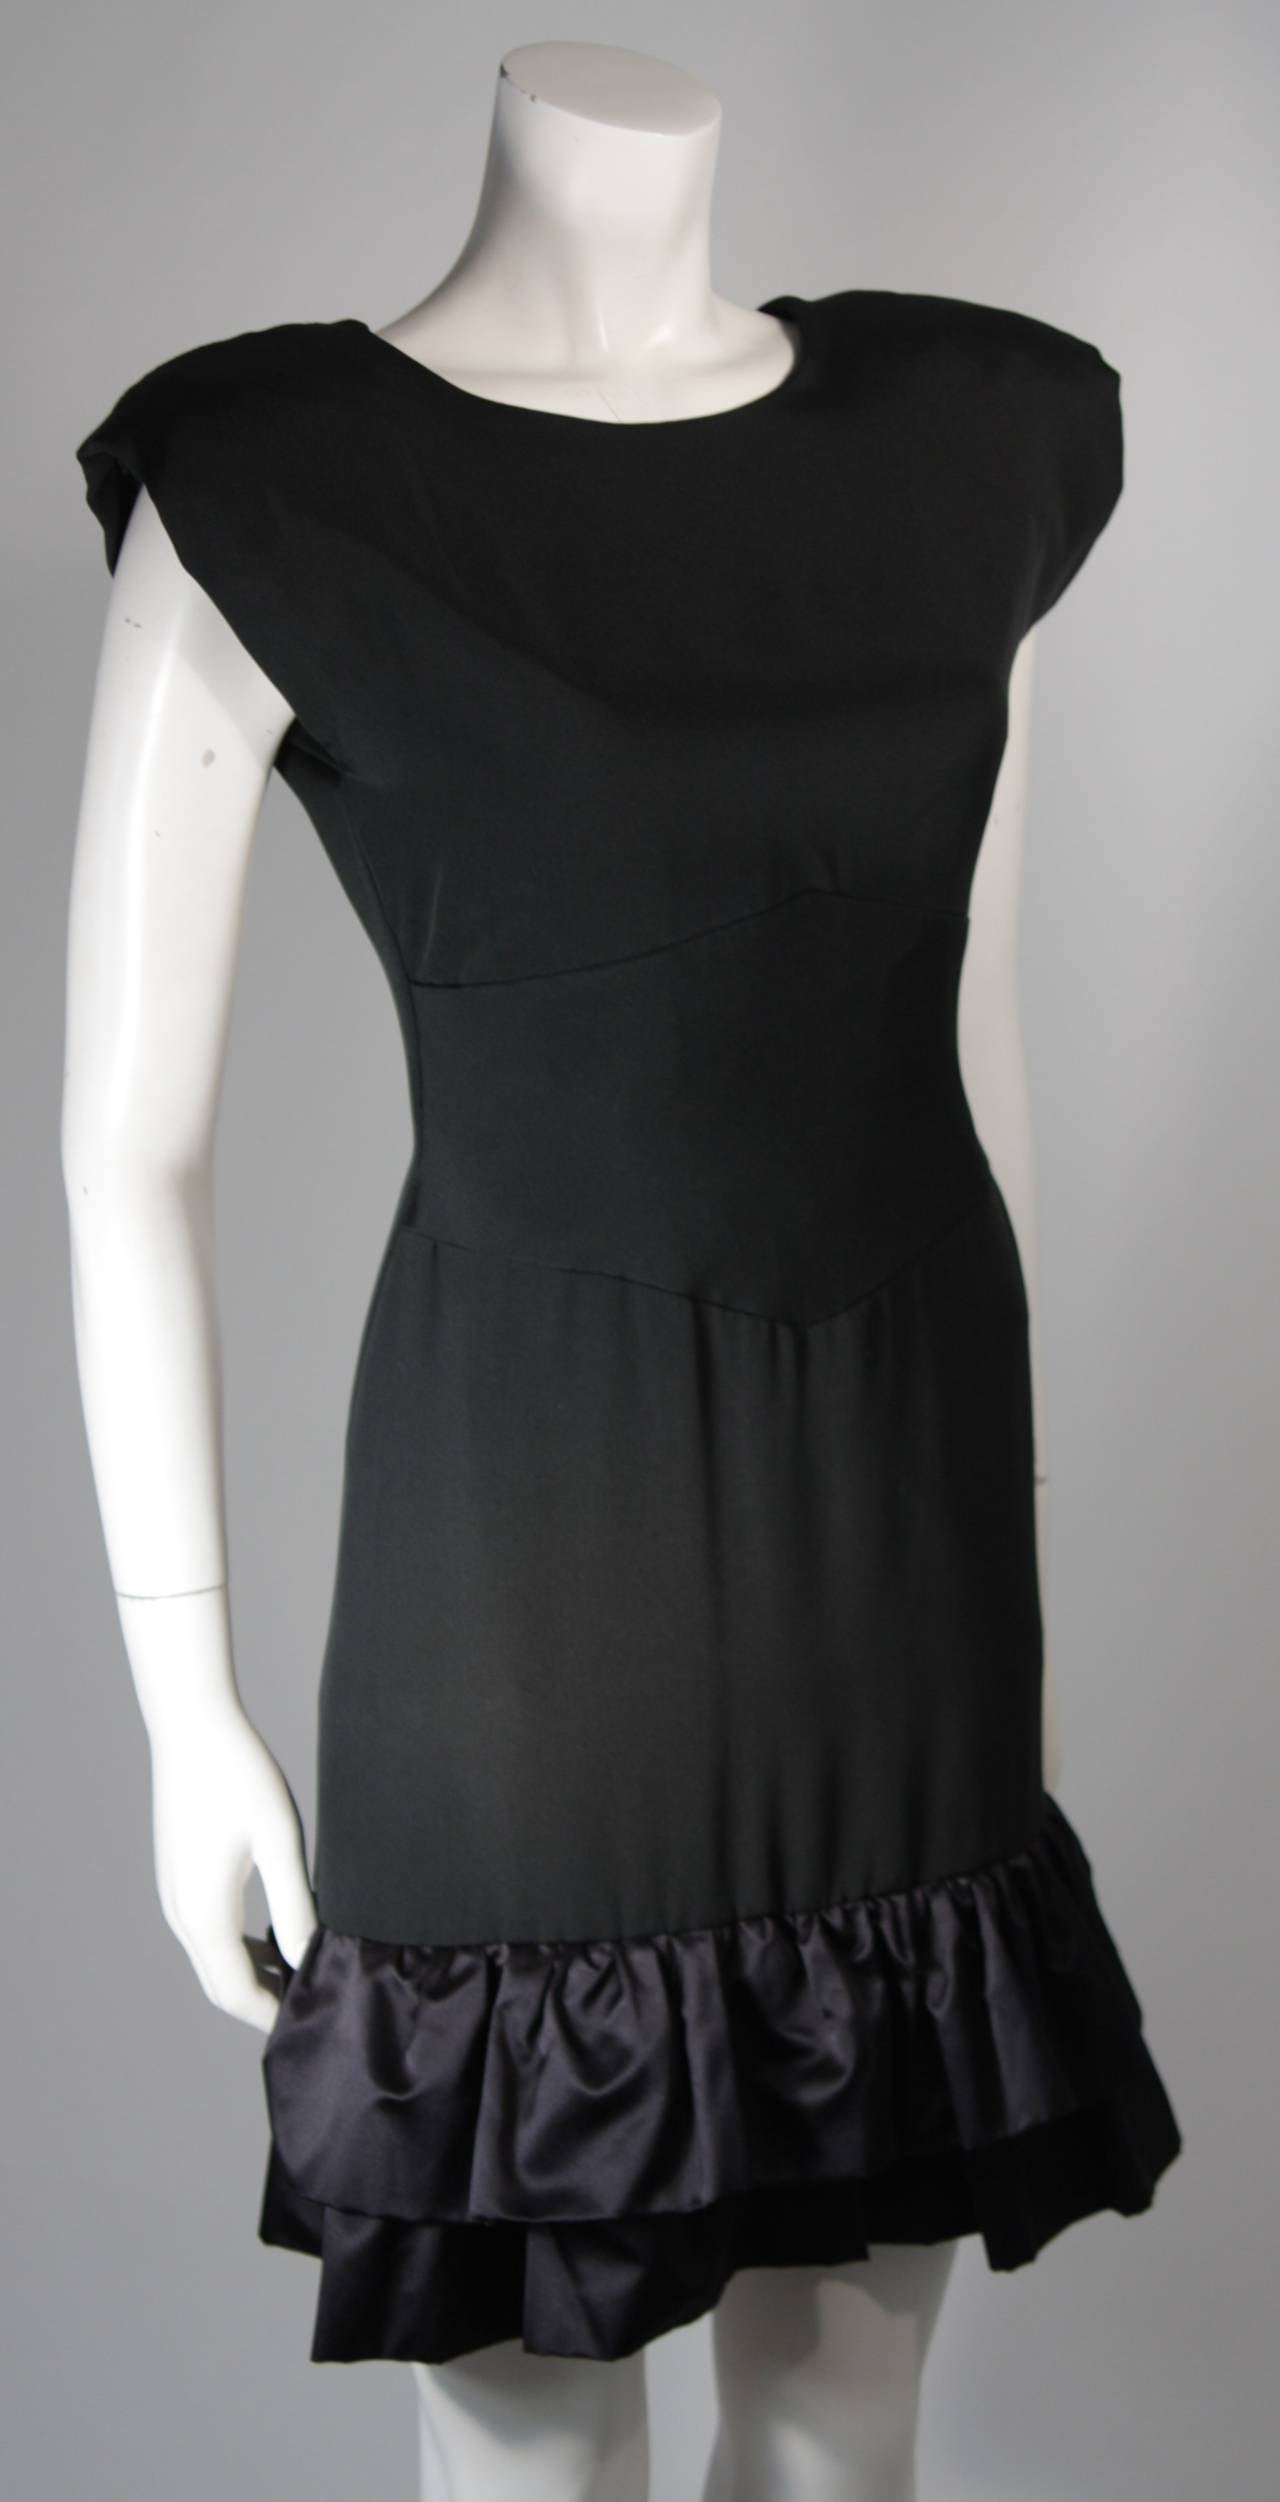 Women's Vicky Tiel Black Silk Cocktail Dress with Criss Cross Back Size Small